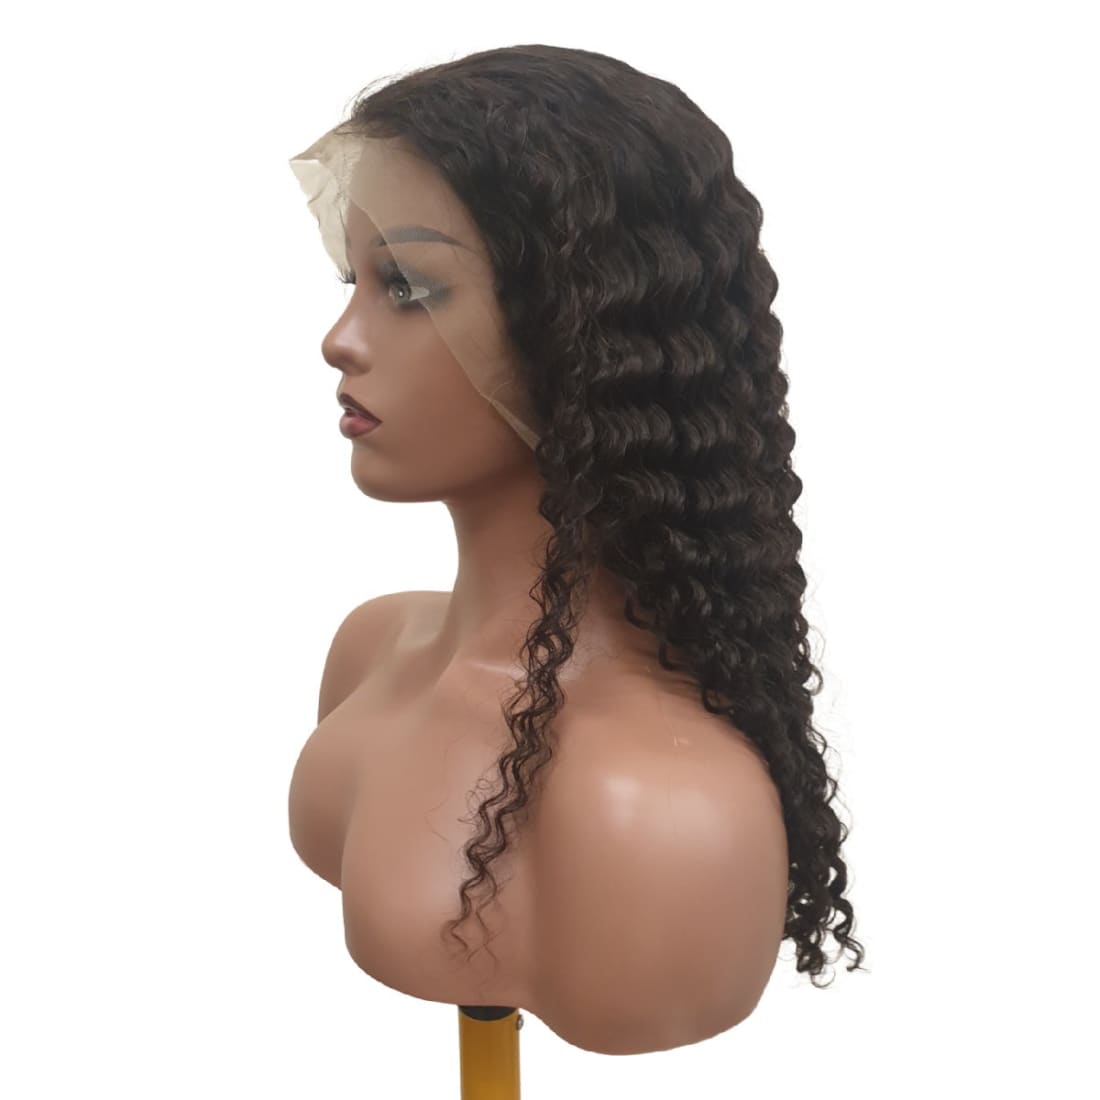 Wig - Human Hair - Curly 20 - Synthetic Hair -> Wig